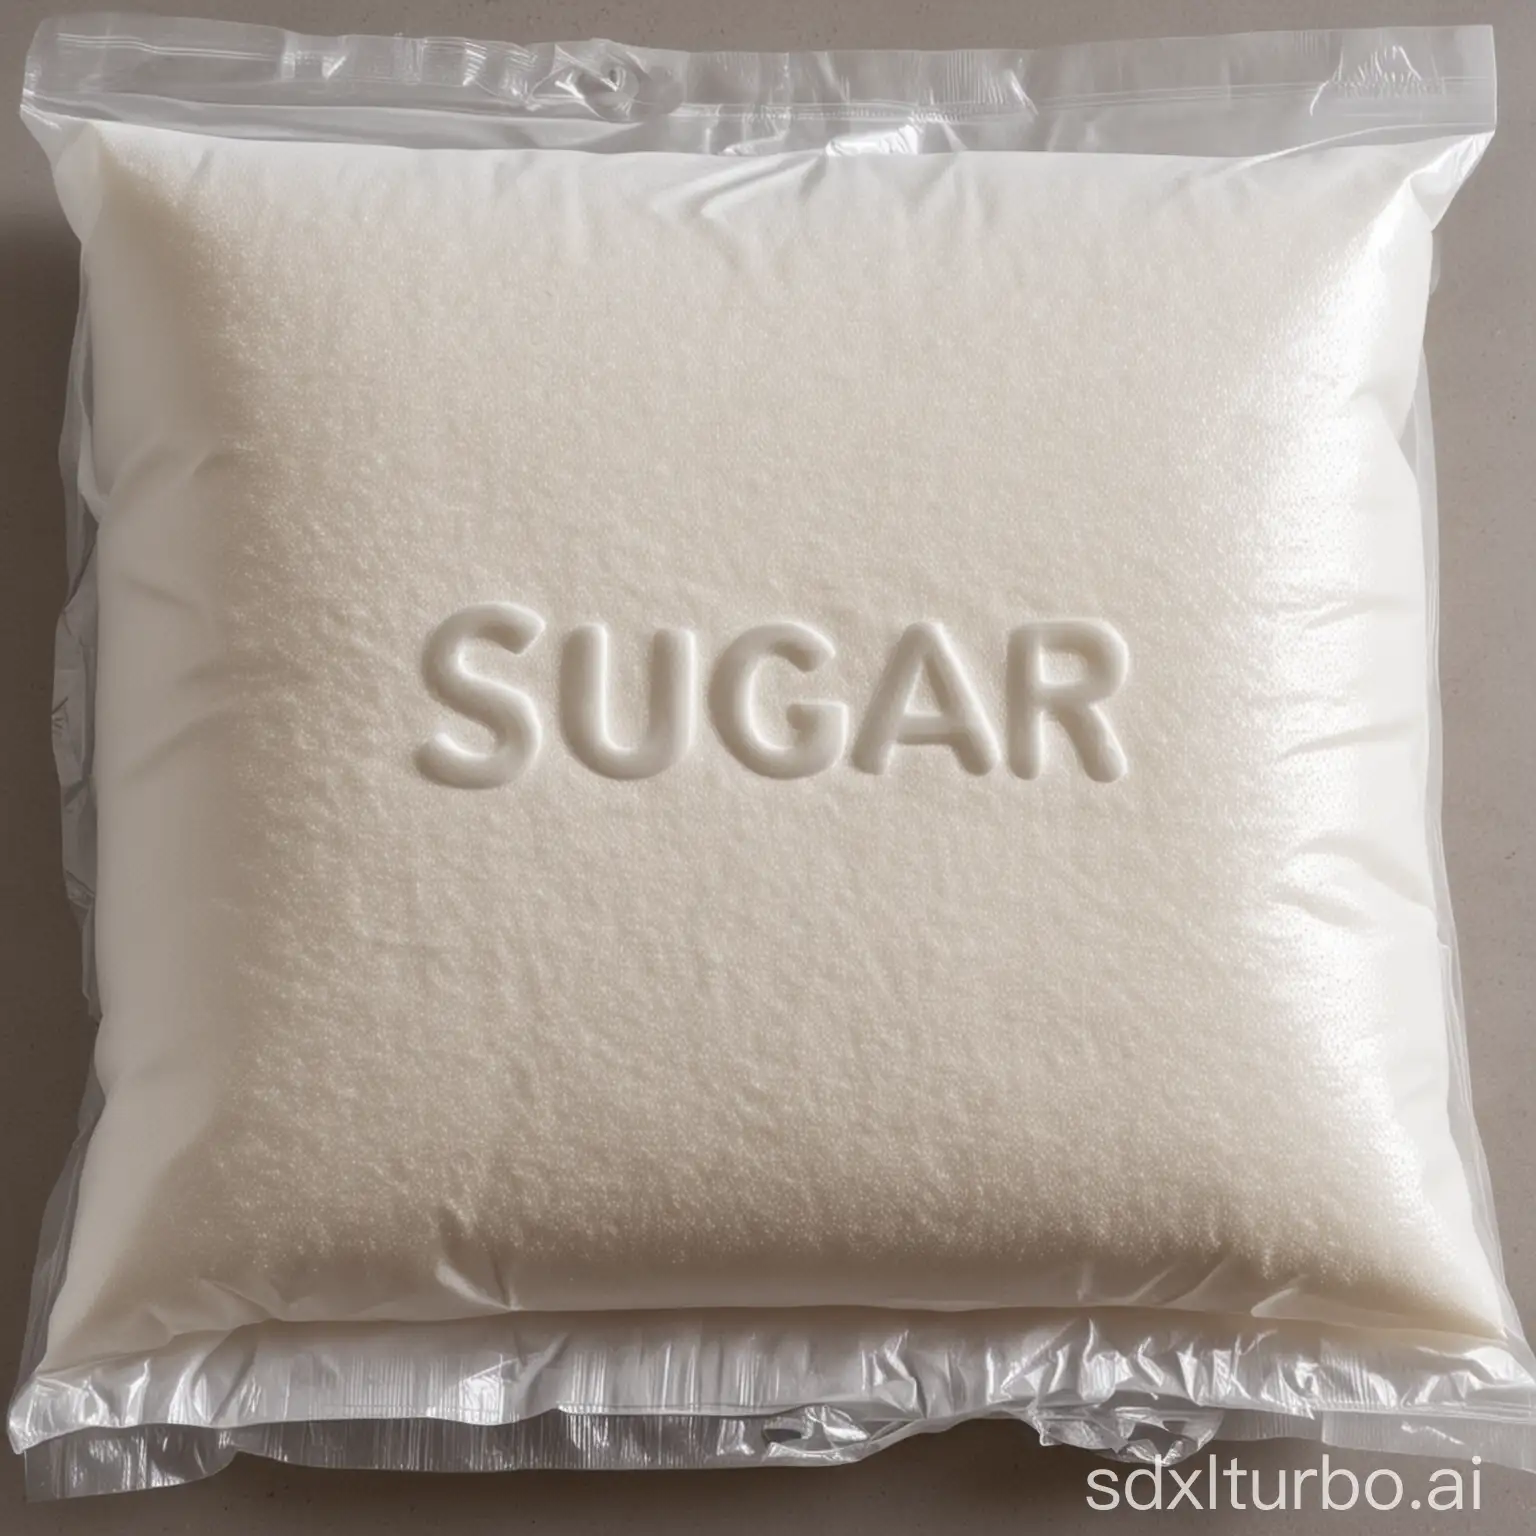 10 kg white sugar packed with the " sugar" name written on it.